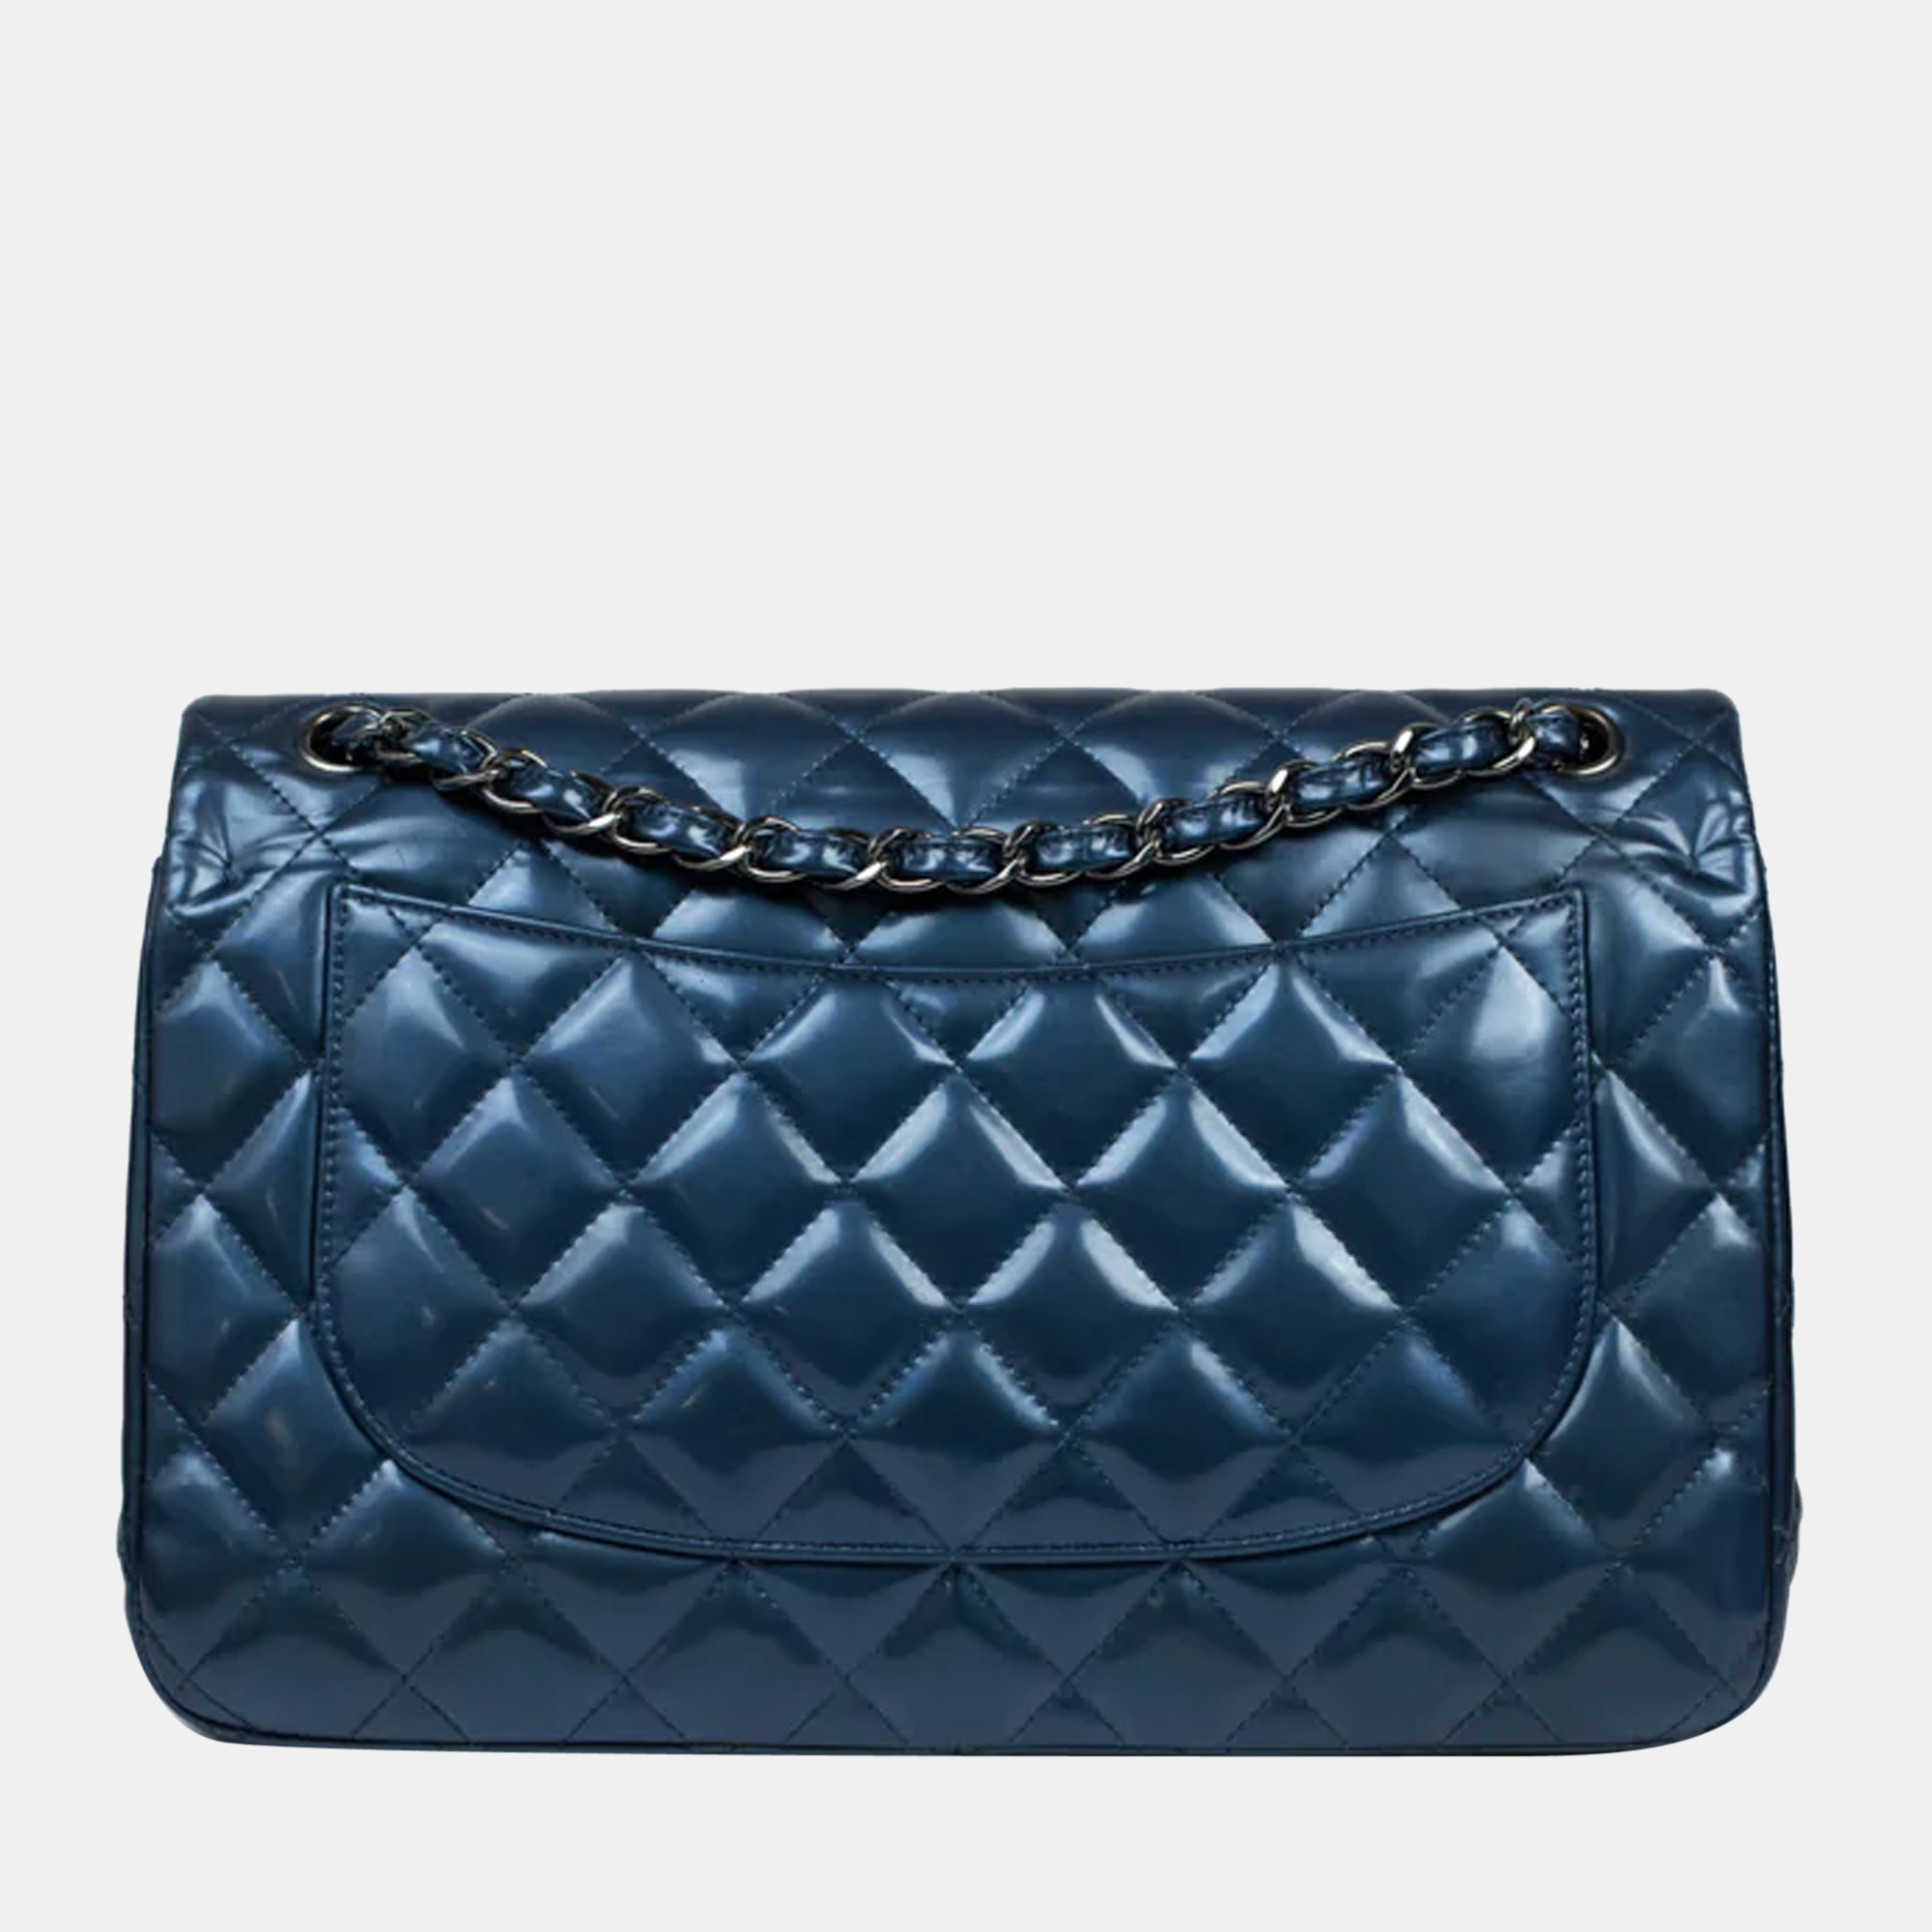 Chanel Blue Quilted Caviar Leather Jumbo Classic Flap Bag